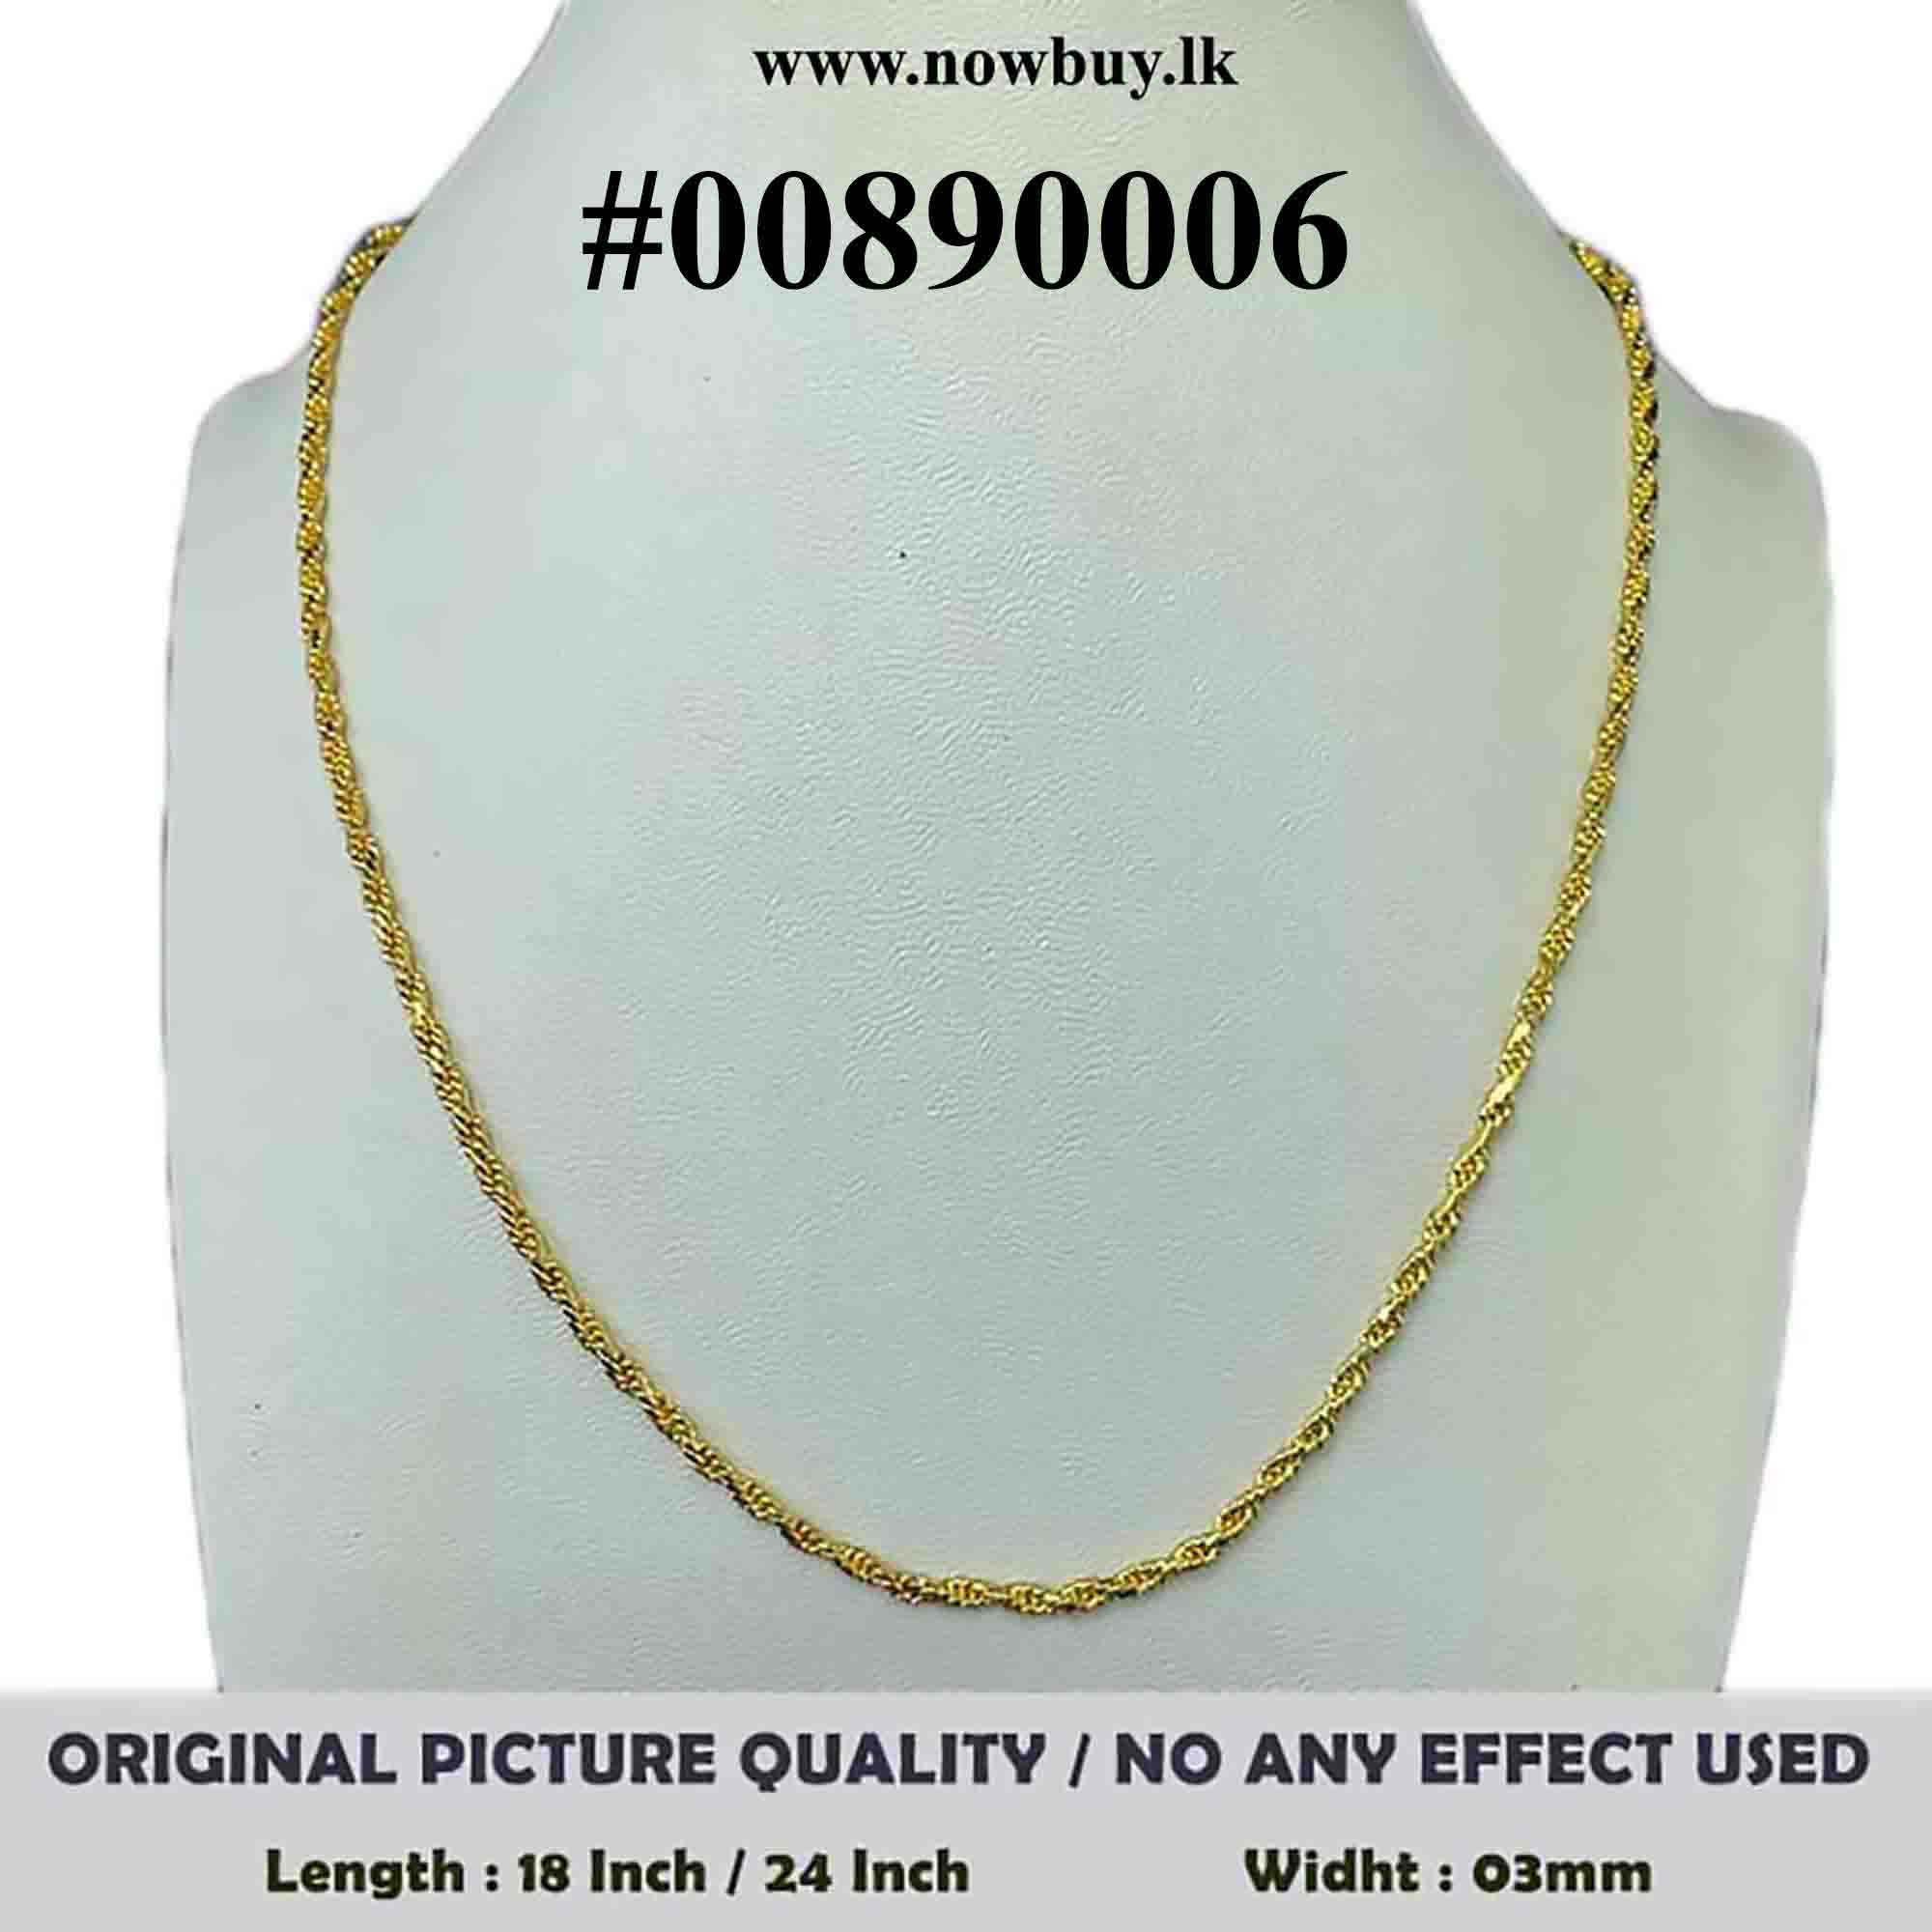 Gold Plated 02mm Rope Chain 18/24 Inch (NBLK) Necklaces NowBuy.lk 2